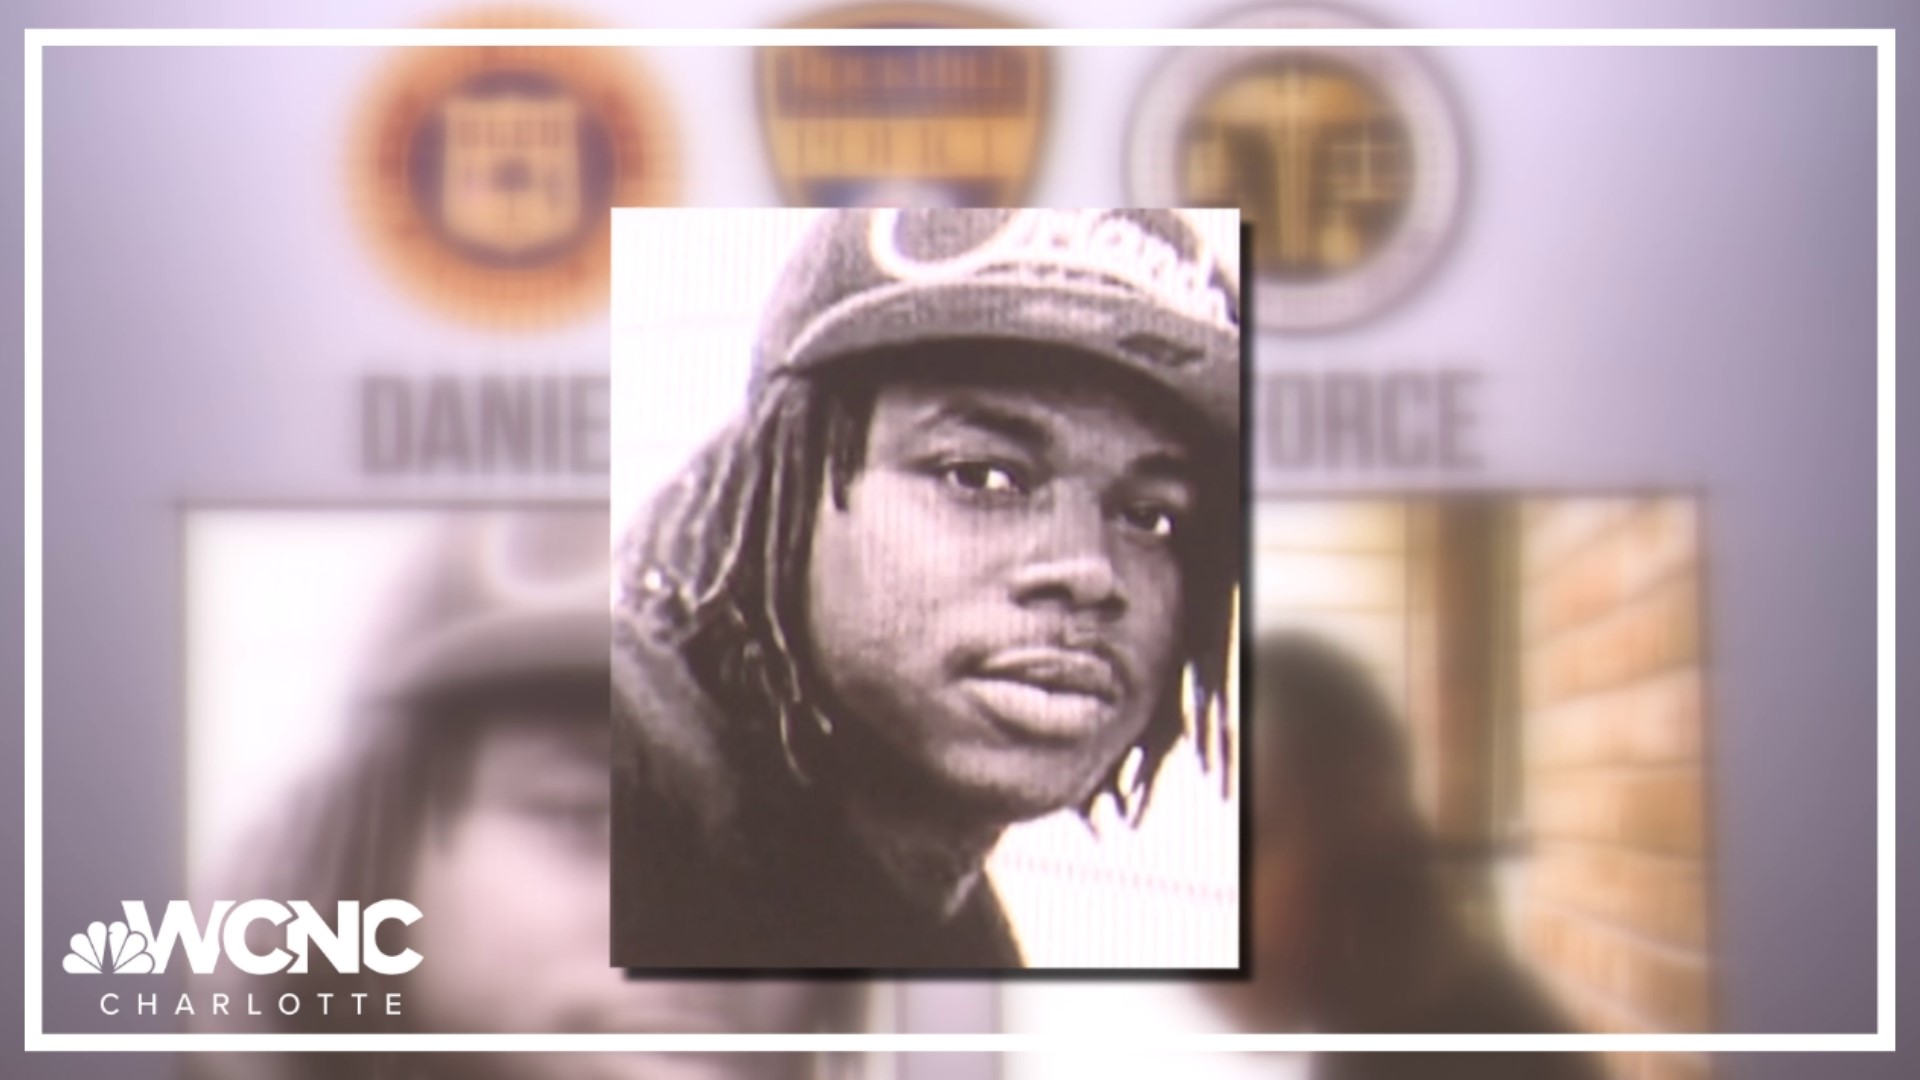 There is a renewed call for help in solving the murder of 29-year-old Daniel Ervin, who was murdered in front of his home 10 years ago.